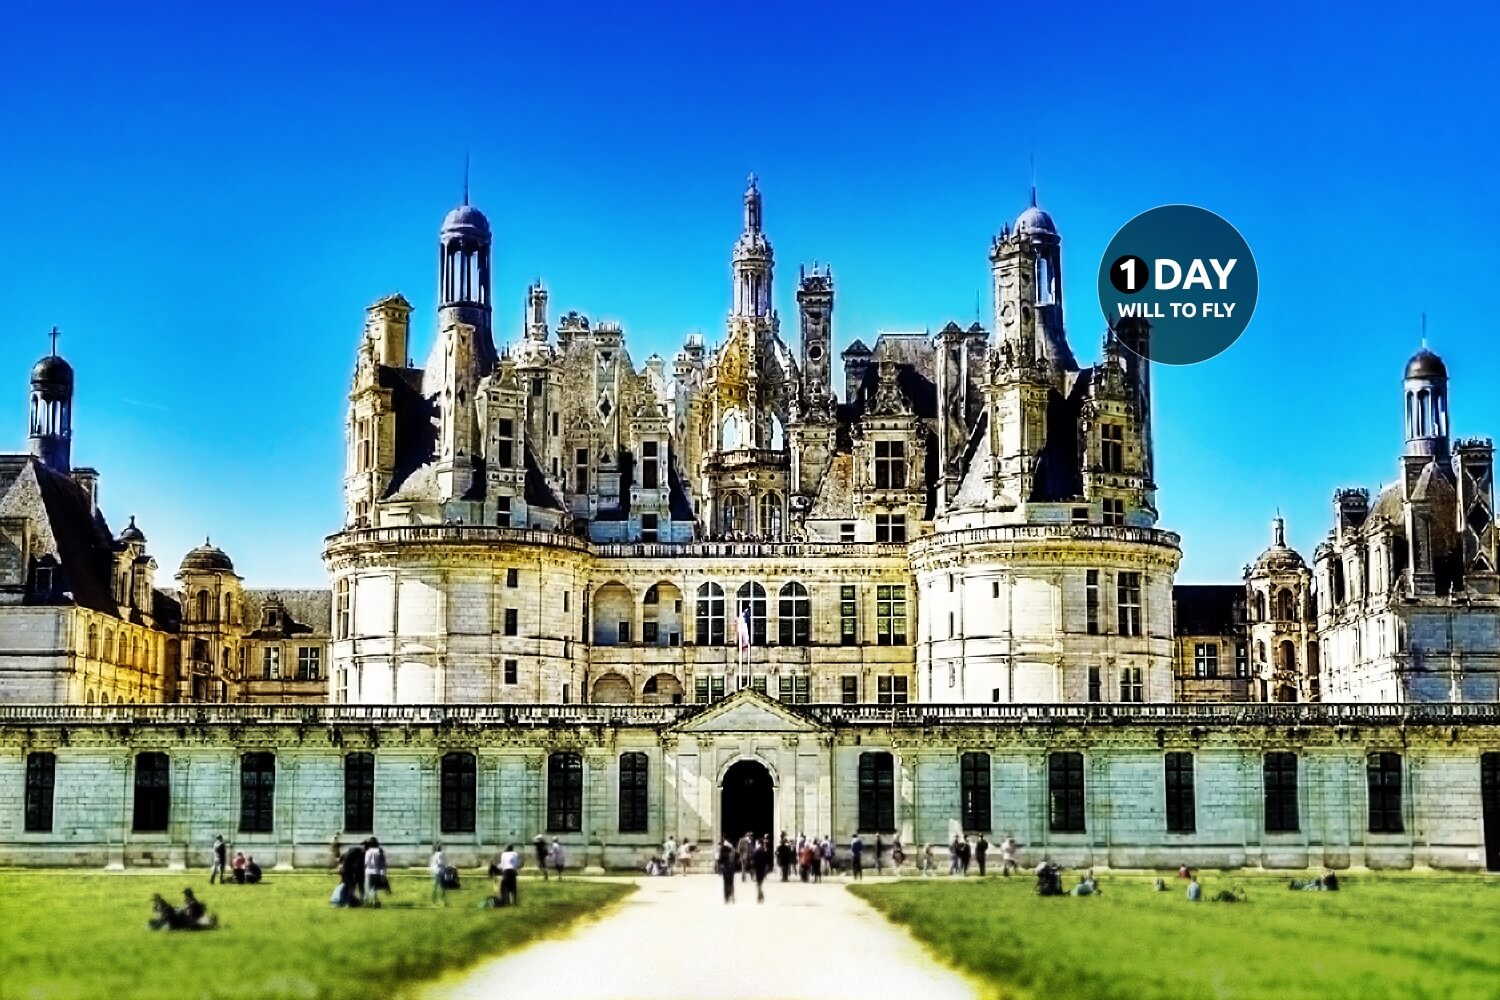 1 Day to the Chambord Castle